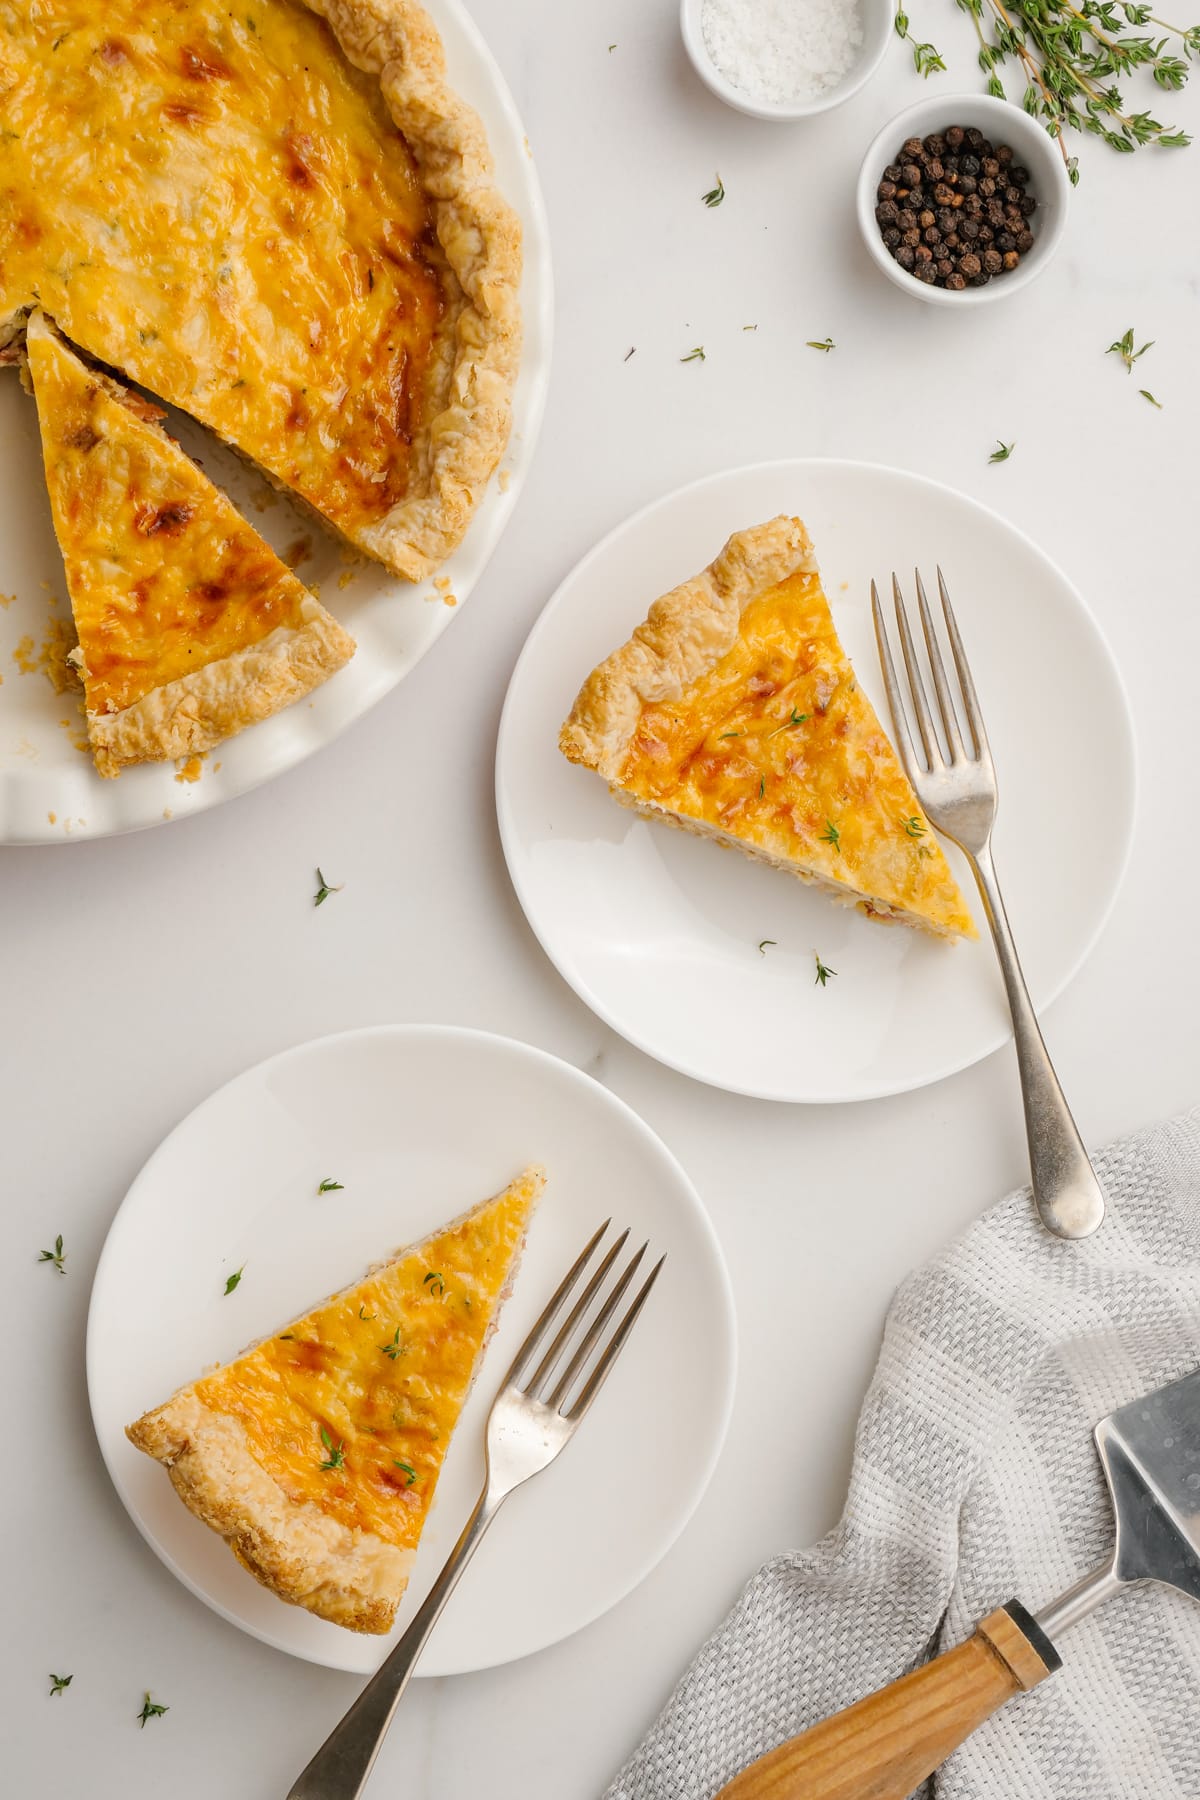 quiche lorraine pieces on plates with forks